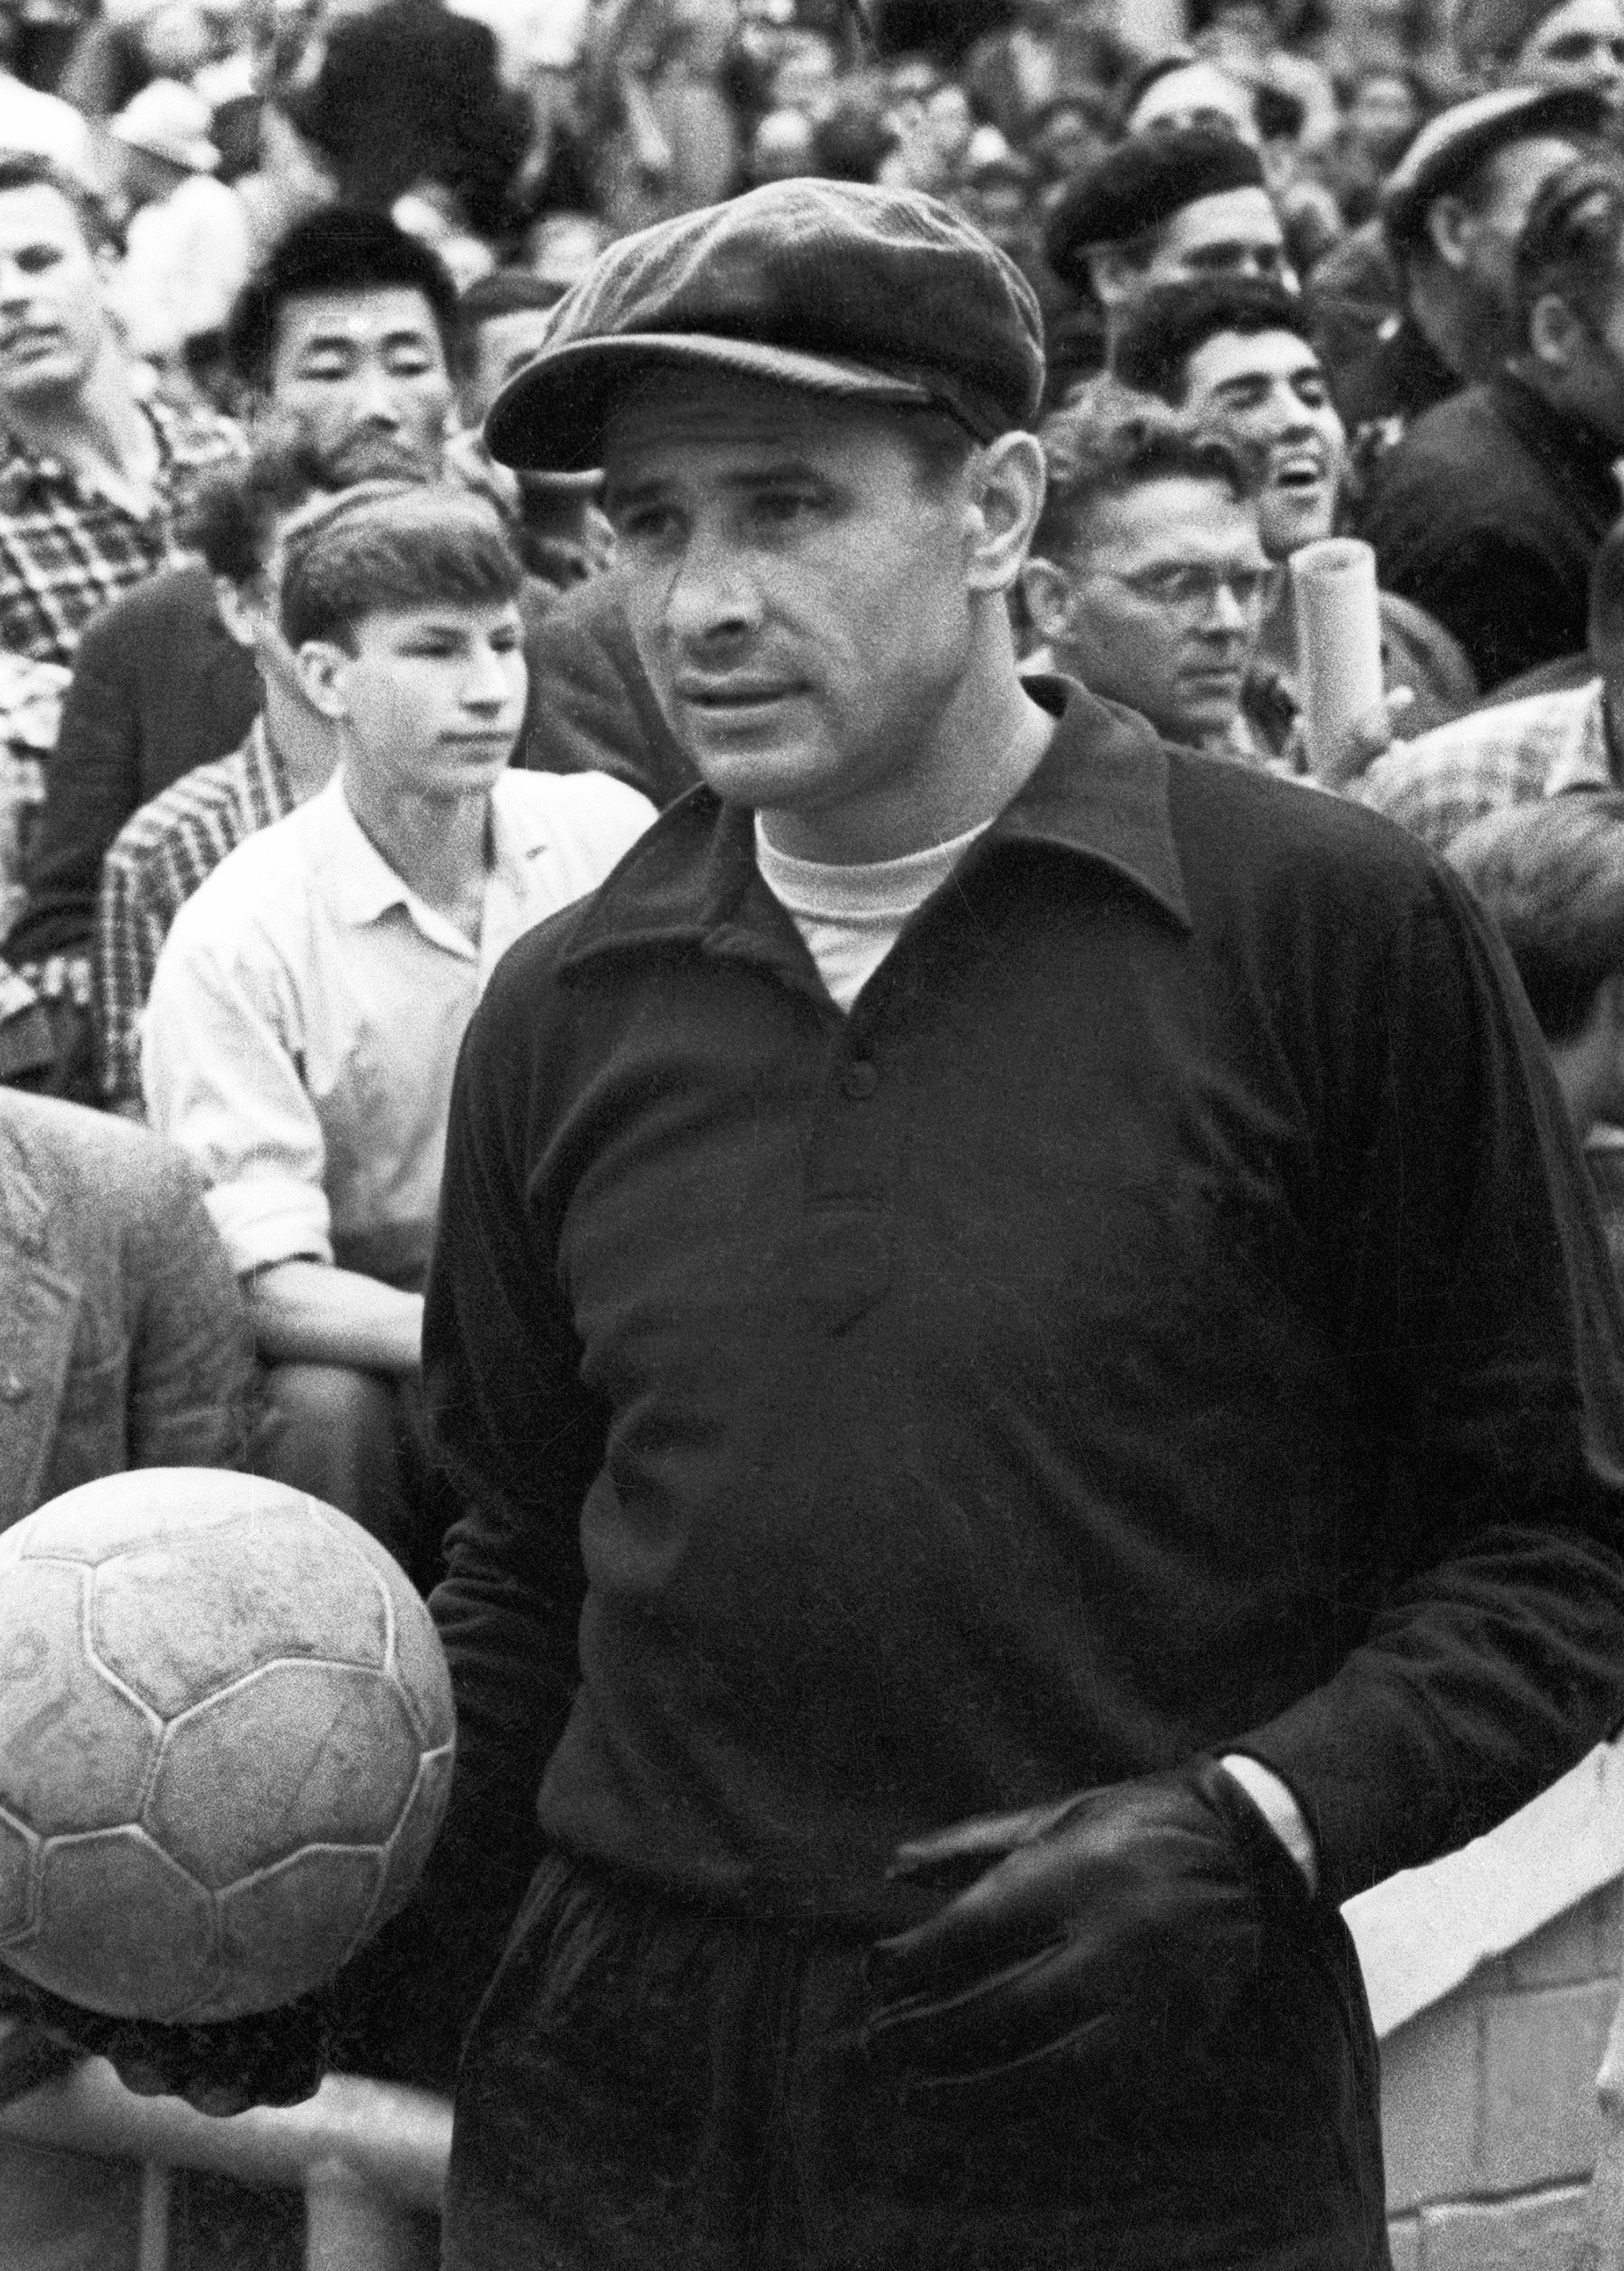 With his hat and dark outfit, Yashin was an extremely stylish player back in the Soviet  era.